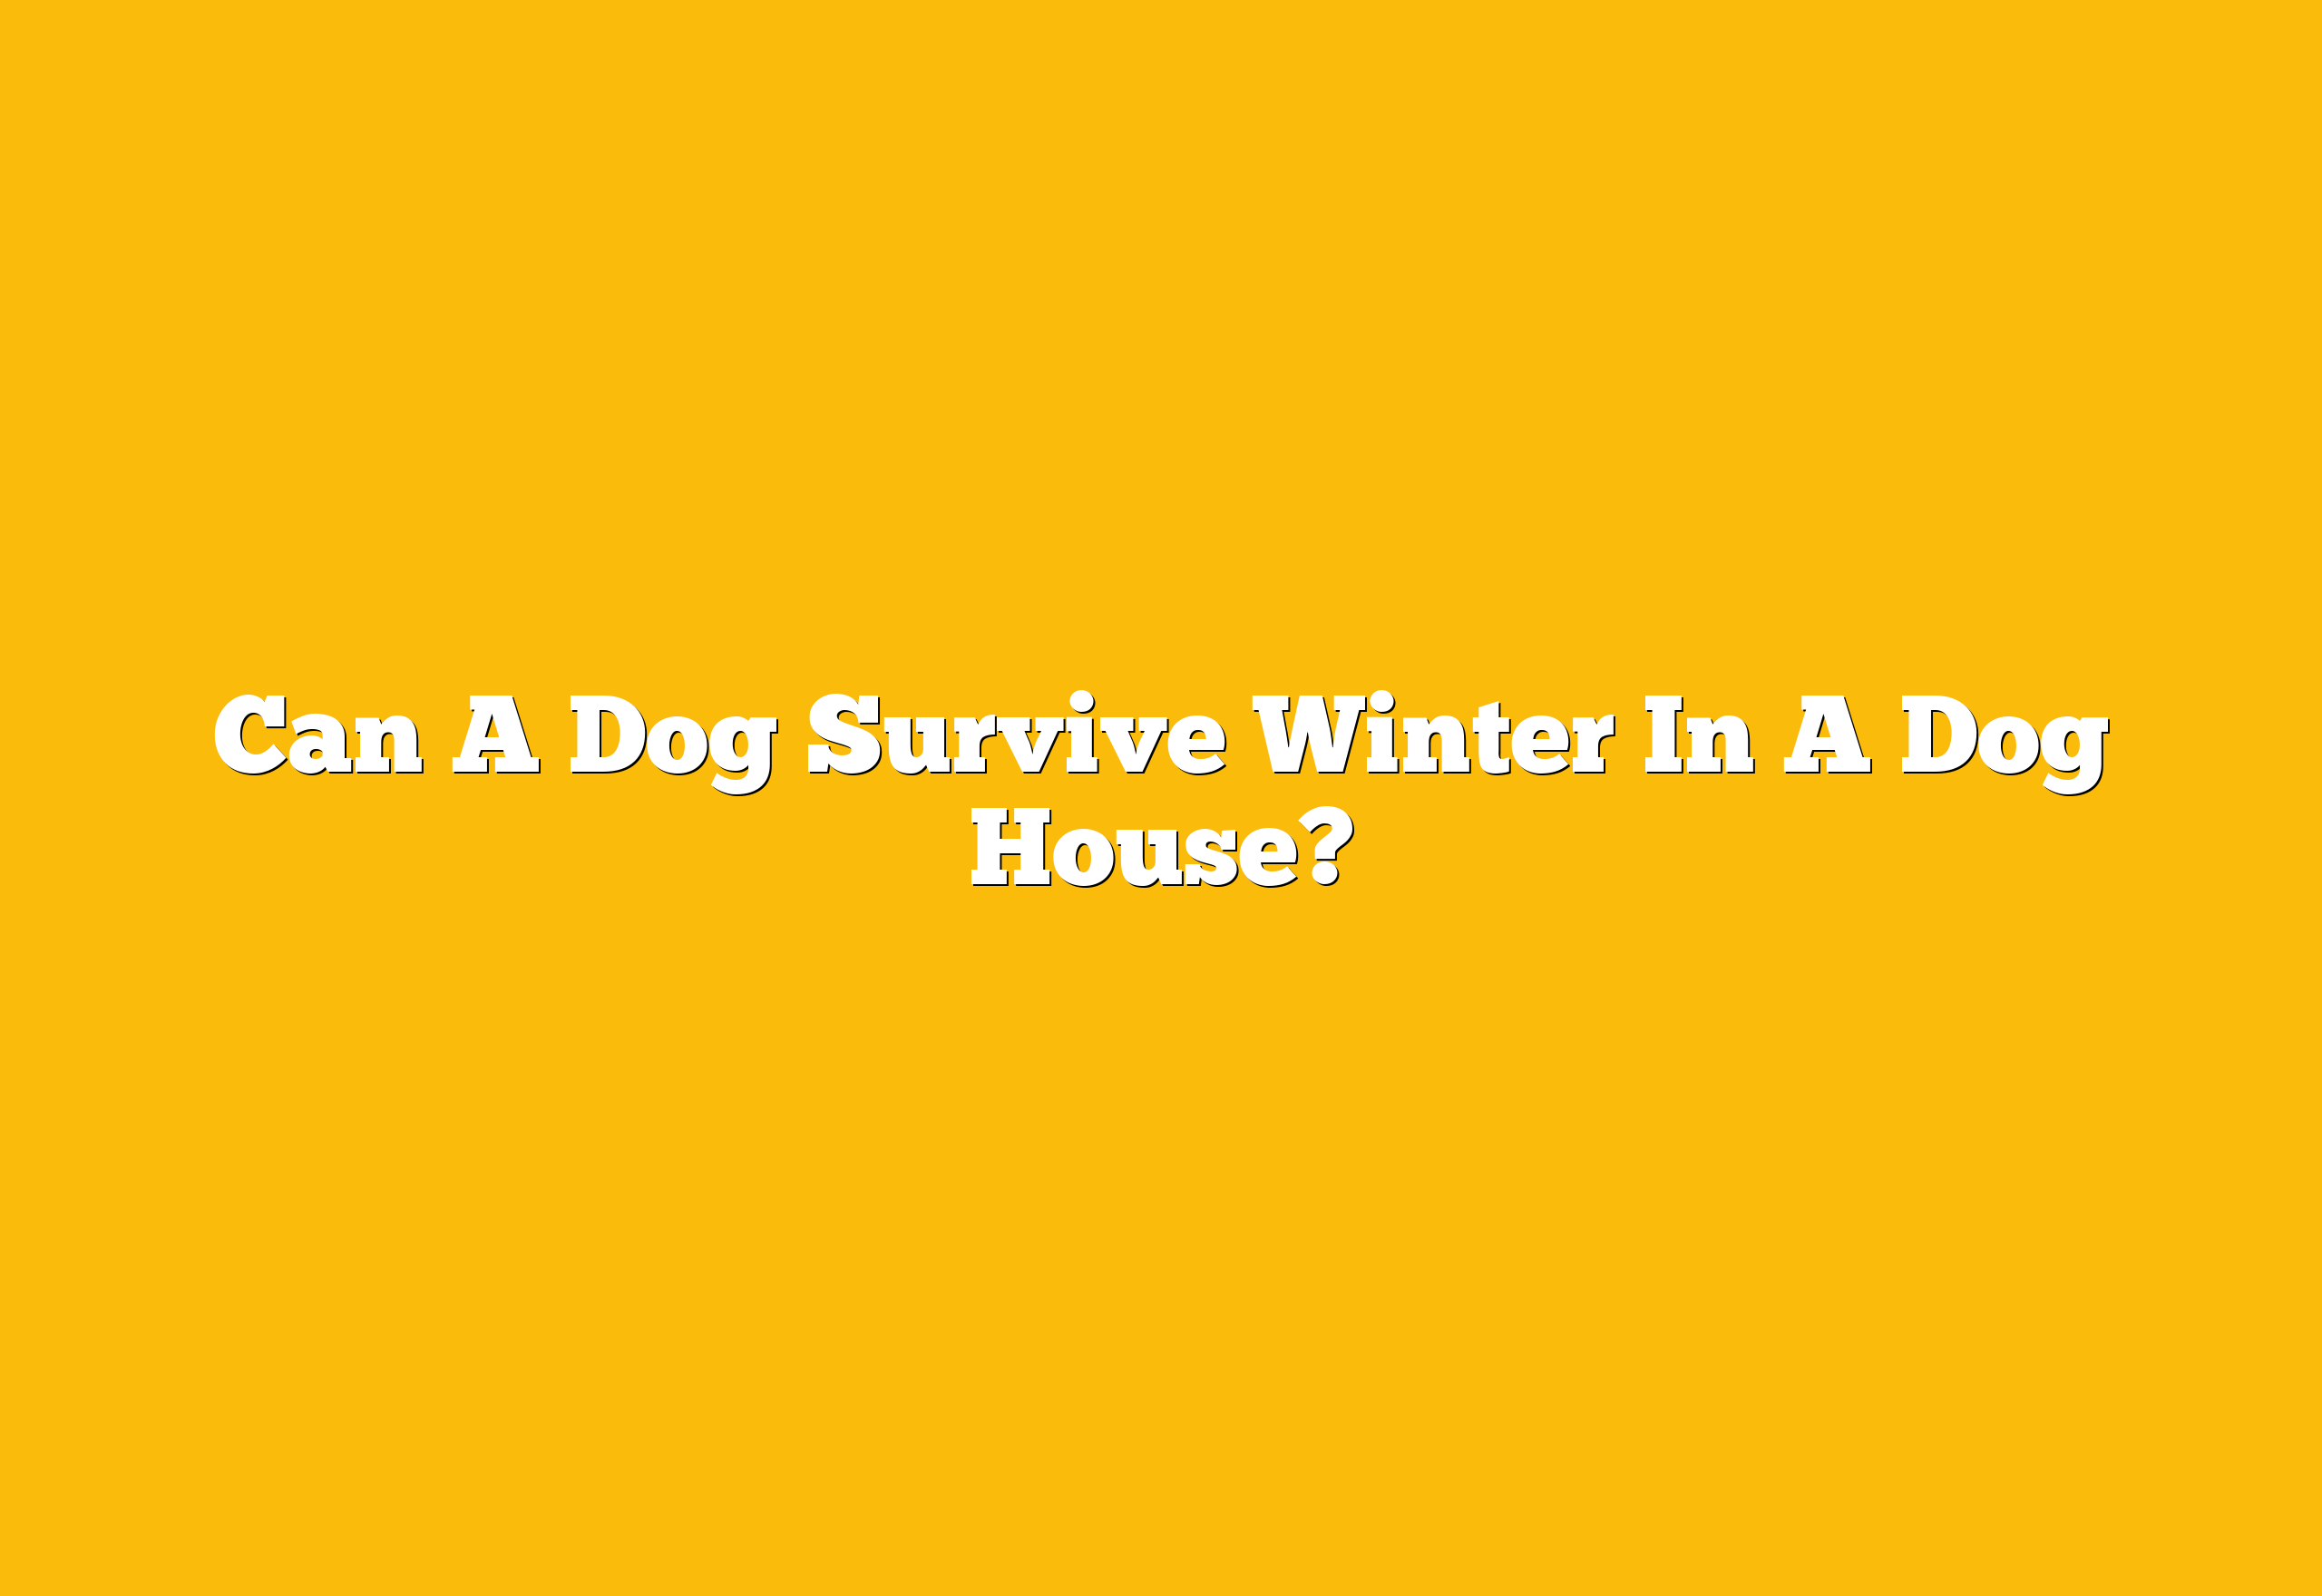 Can A Dog Survive Winter In A Dog House?